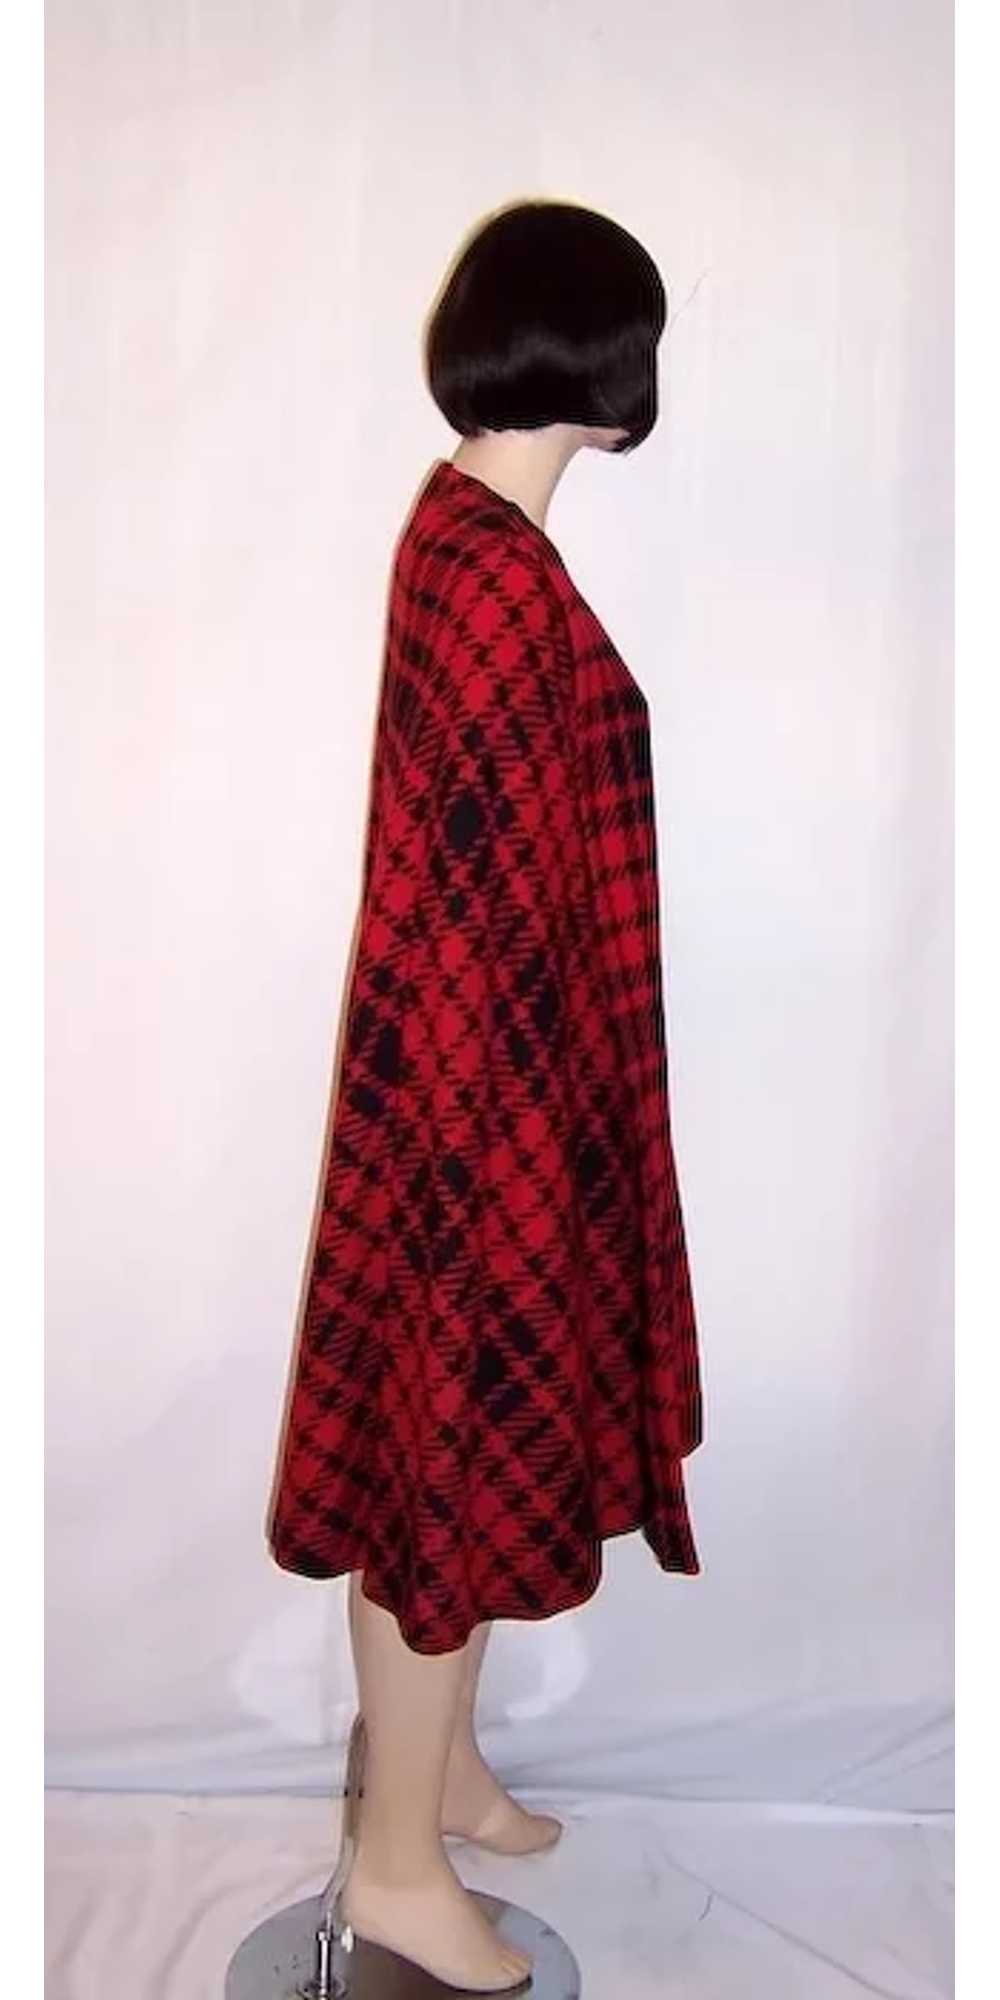 1960's Black and Red Plaid Cape and Skirt Ensemble - image 4